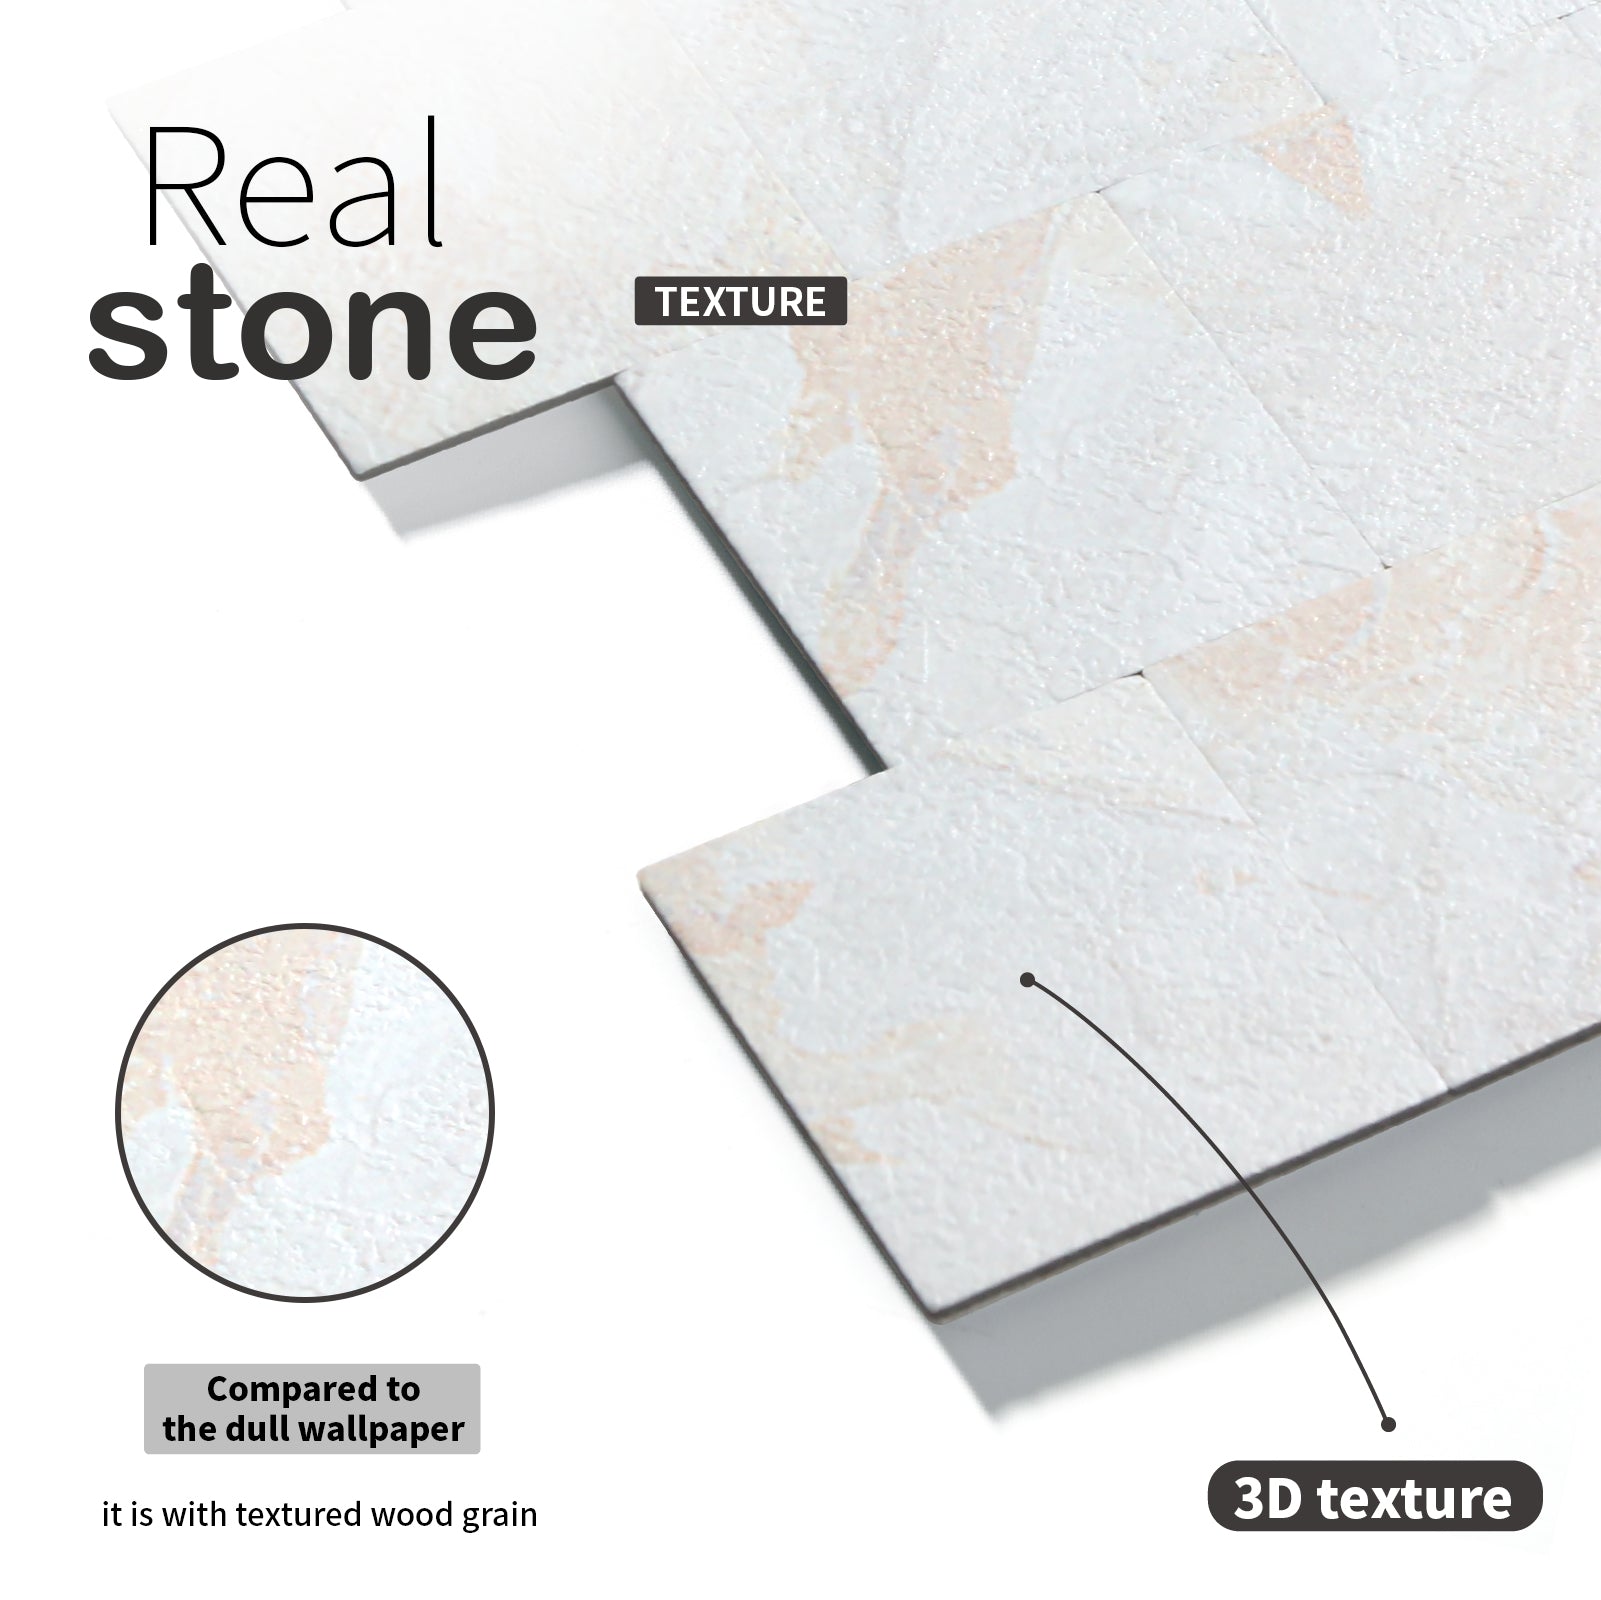 Real stone texture tile